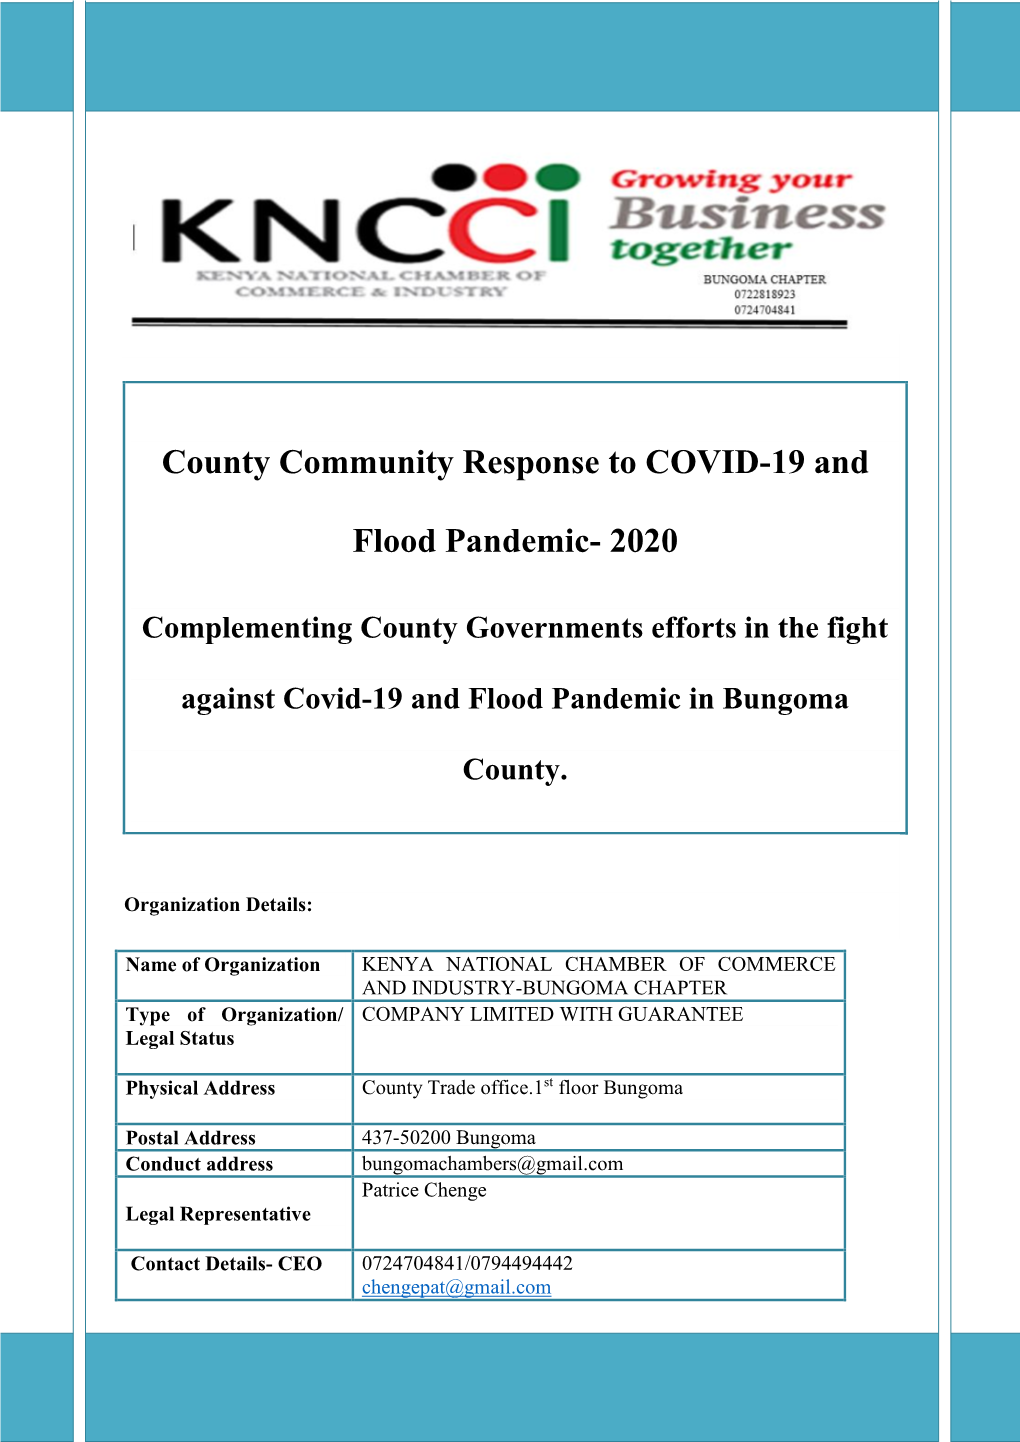 County Community Response to COVID-19 And